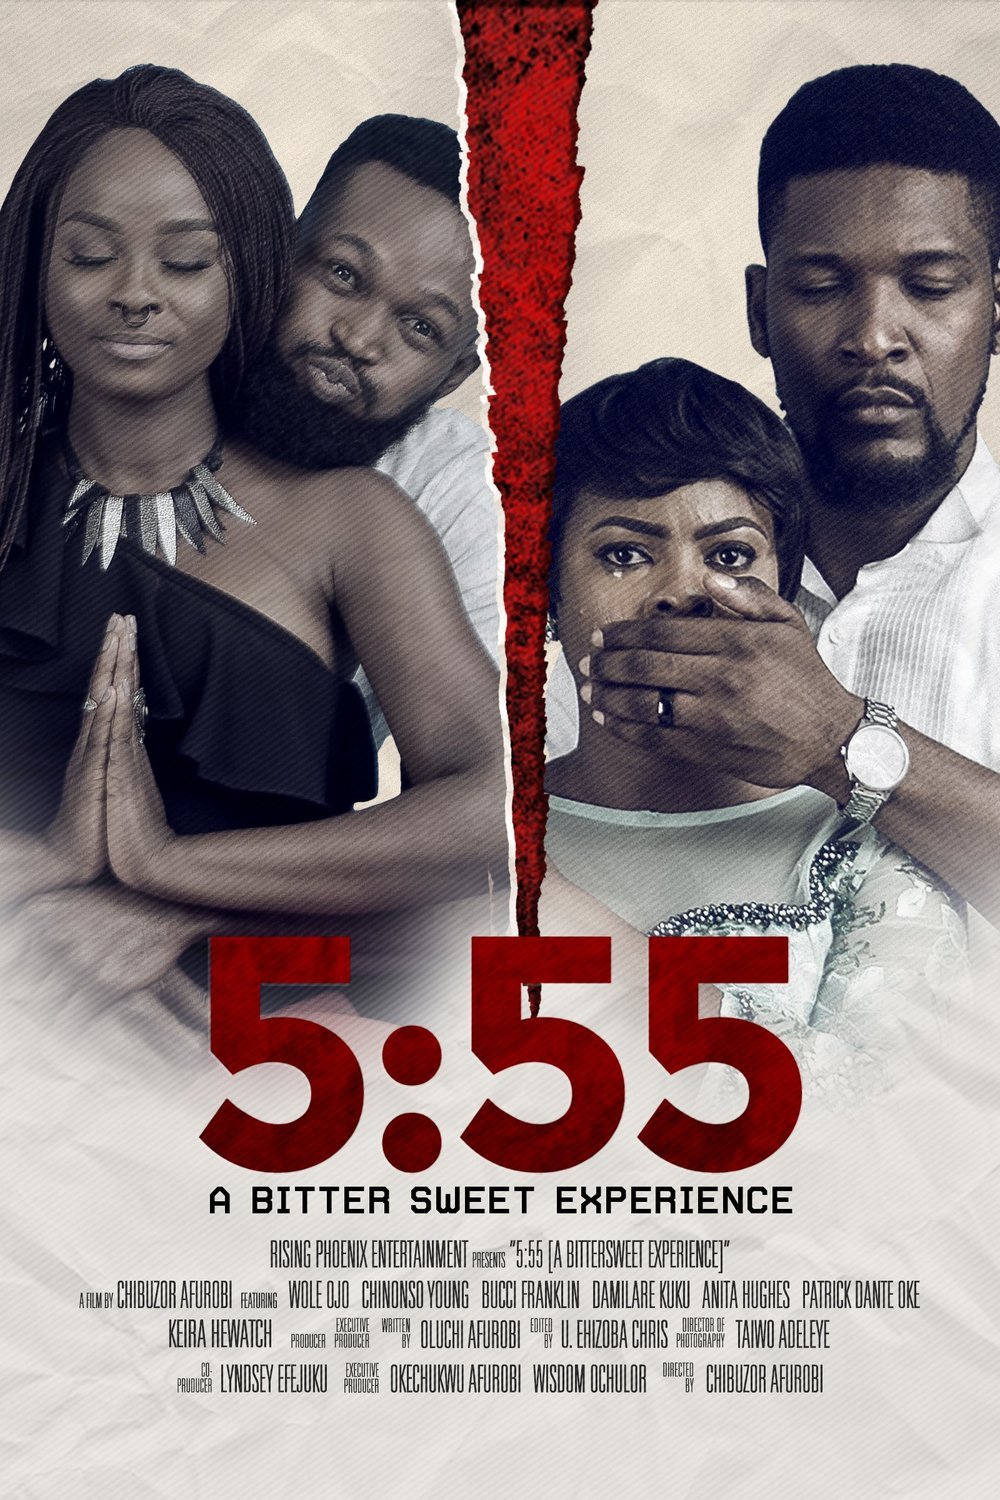 Poster of the movie Five Fifty Five (5:55)